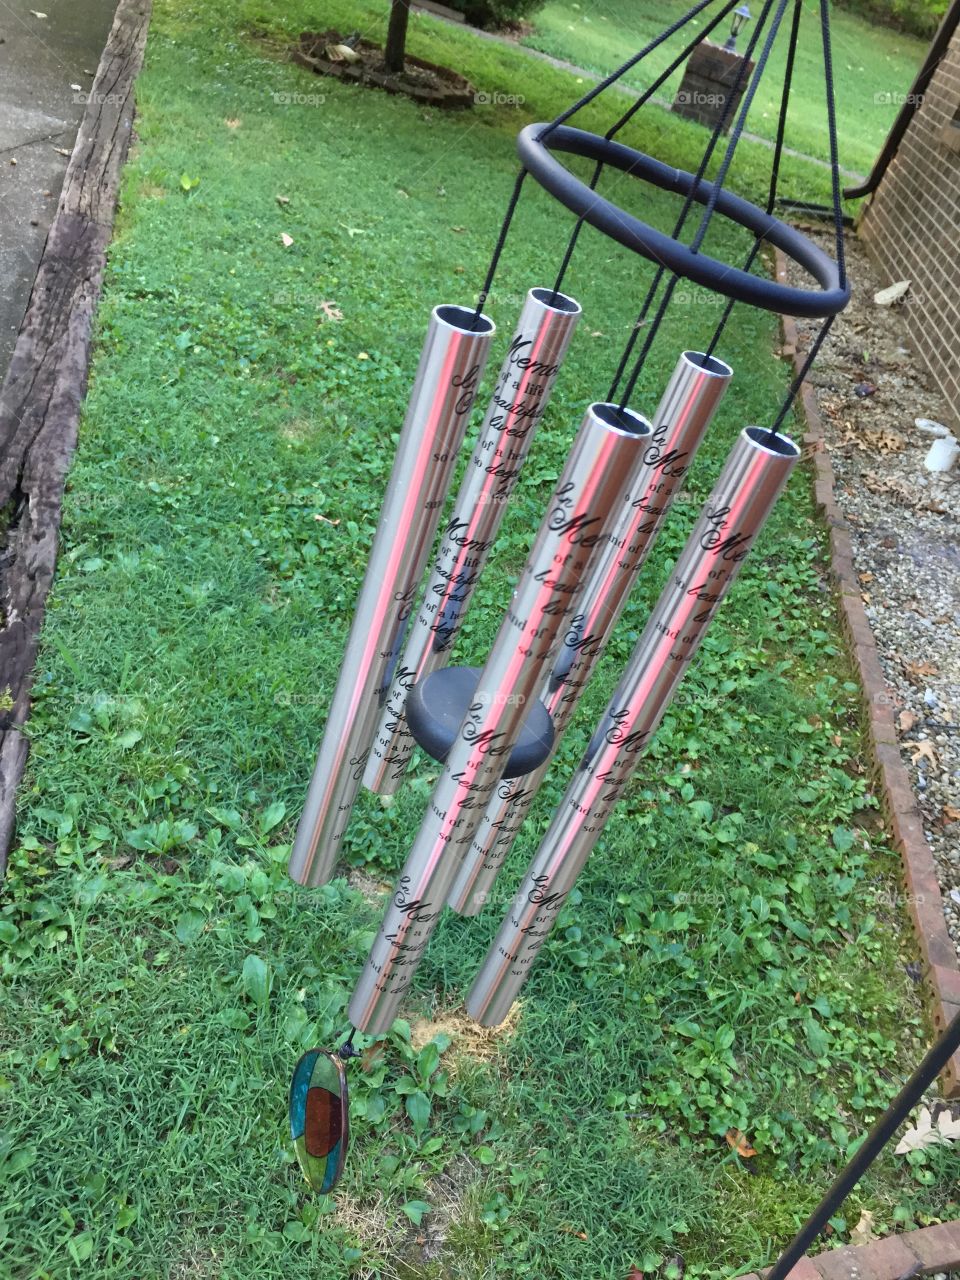 Tint of red on the beautiful wind chimes in the sunset